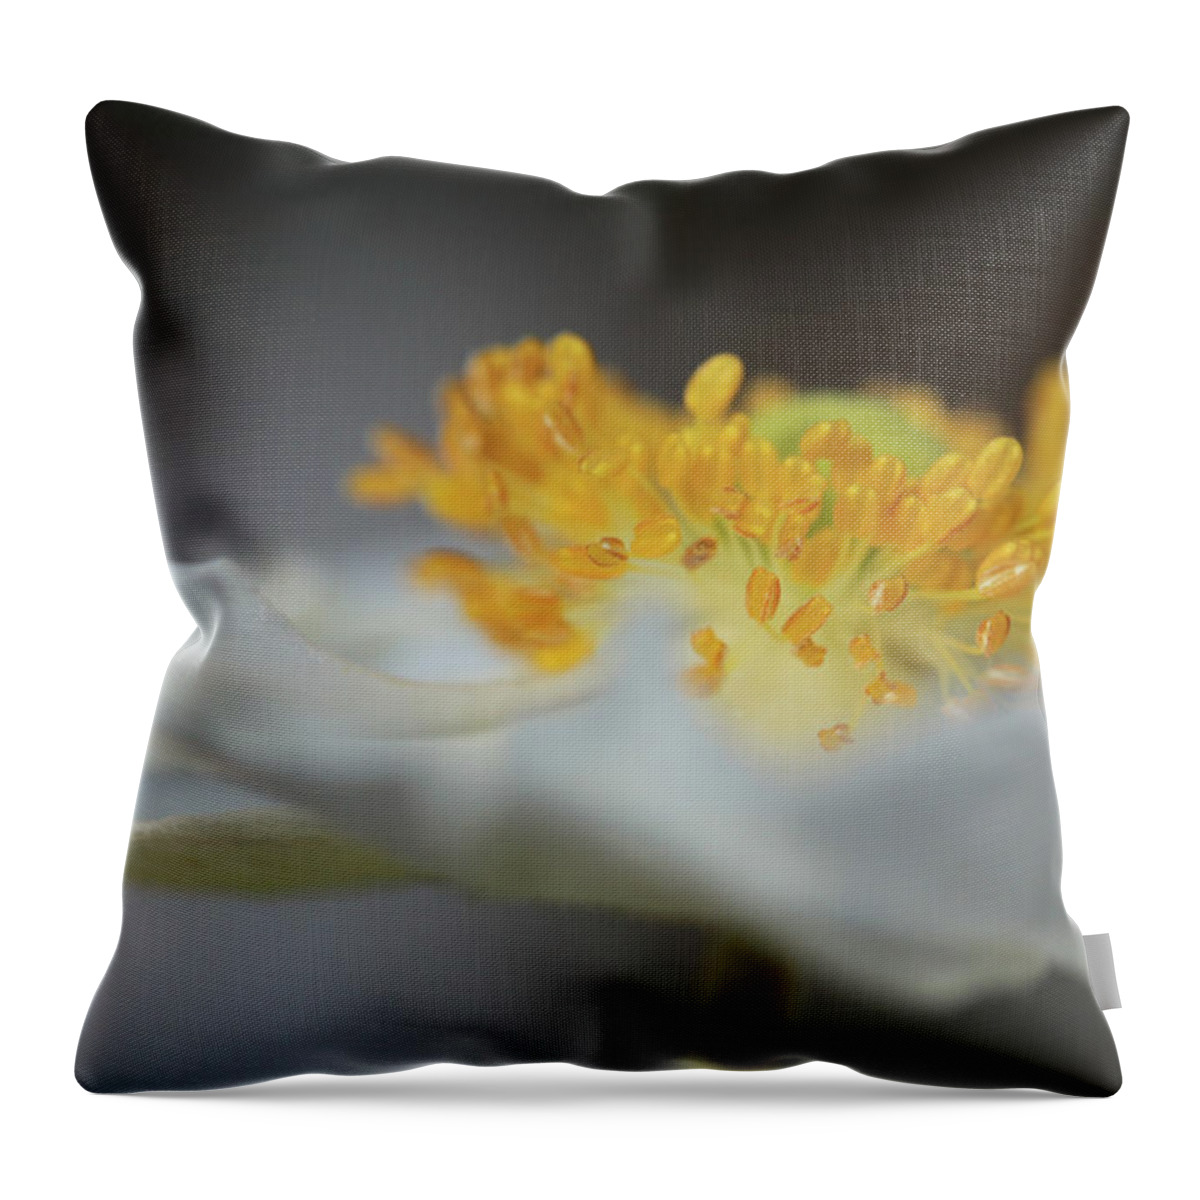 Connie Handsomb Throw Pillow featuring the photograph Ice Glow by Connie Handscomb